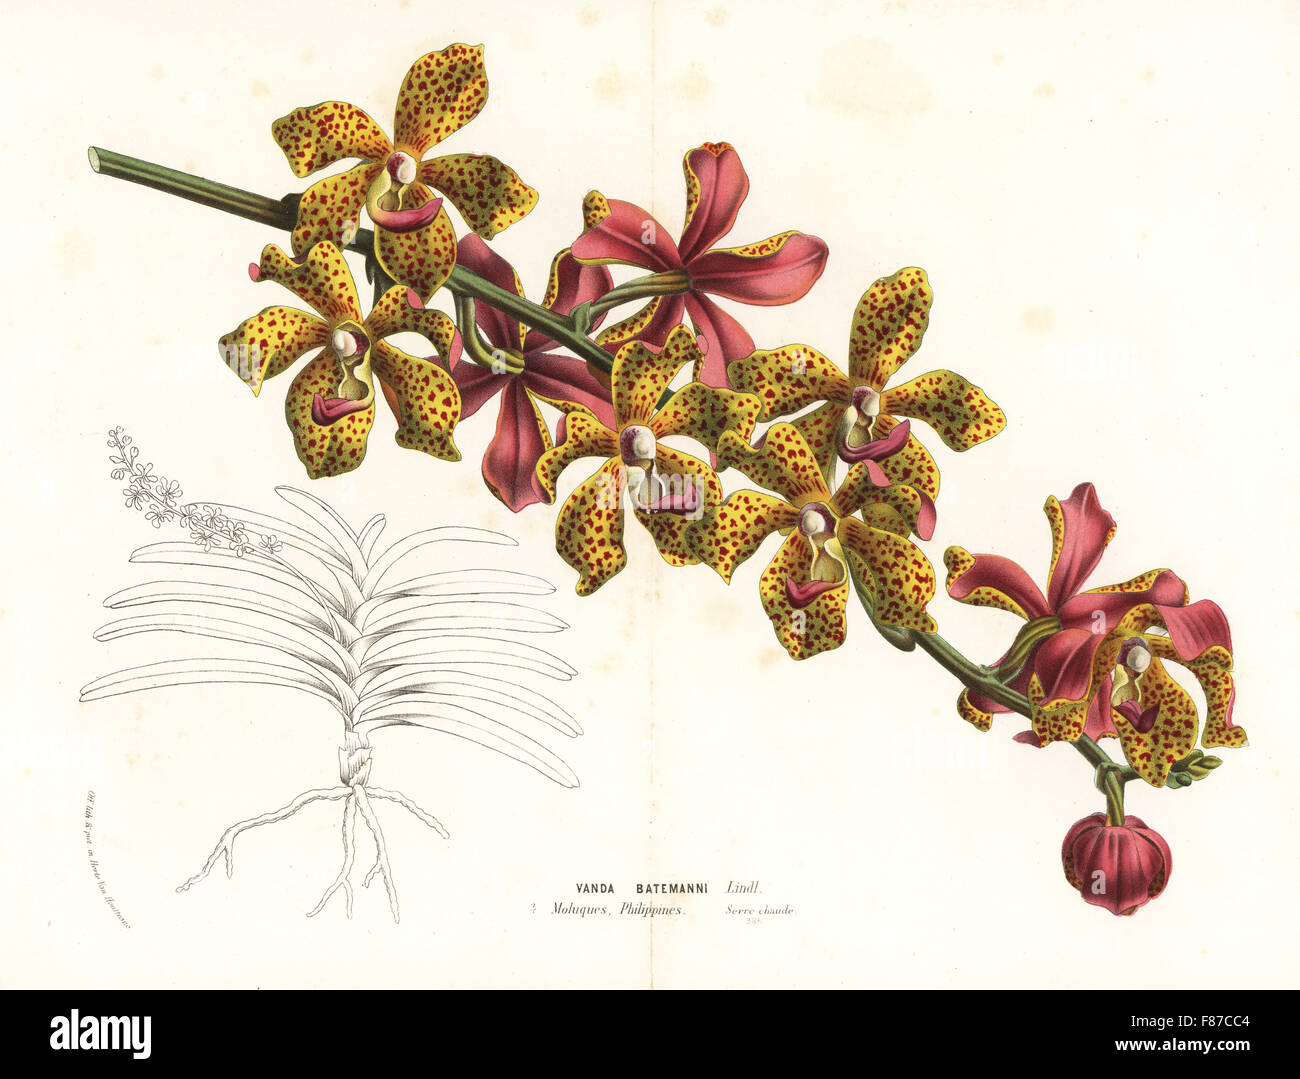 Vandopsis lissochiloides orchid (Vanda batemanii). Moluccas, Philippines. Handcoloured lithograph from Louis van Houtte and Charles Lemaire's Flowers of the Gardens and Hothouses of Europe, Flore des Serres et des Jardins de l'Europe, Ghent, Belgium, 1870. Stock Photo